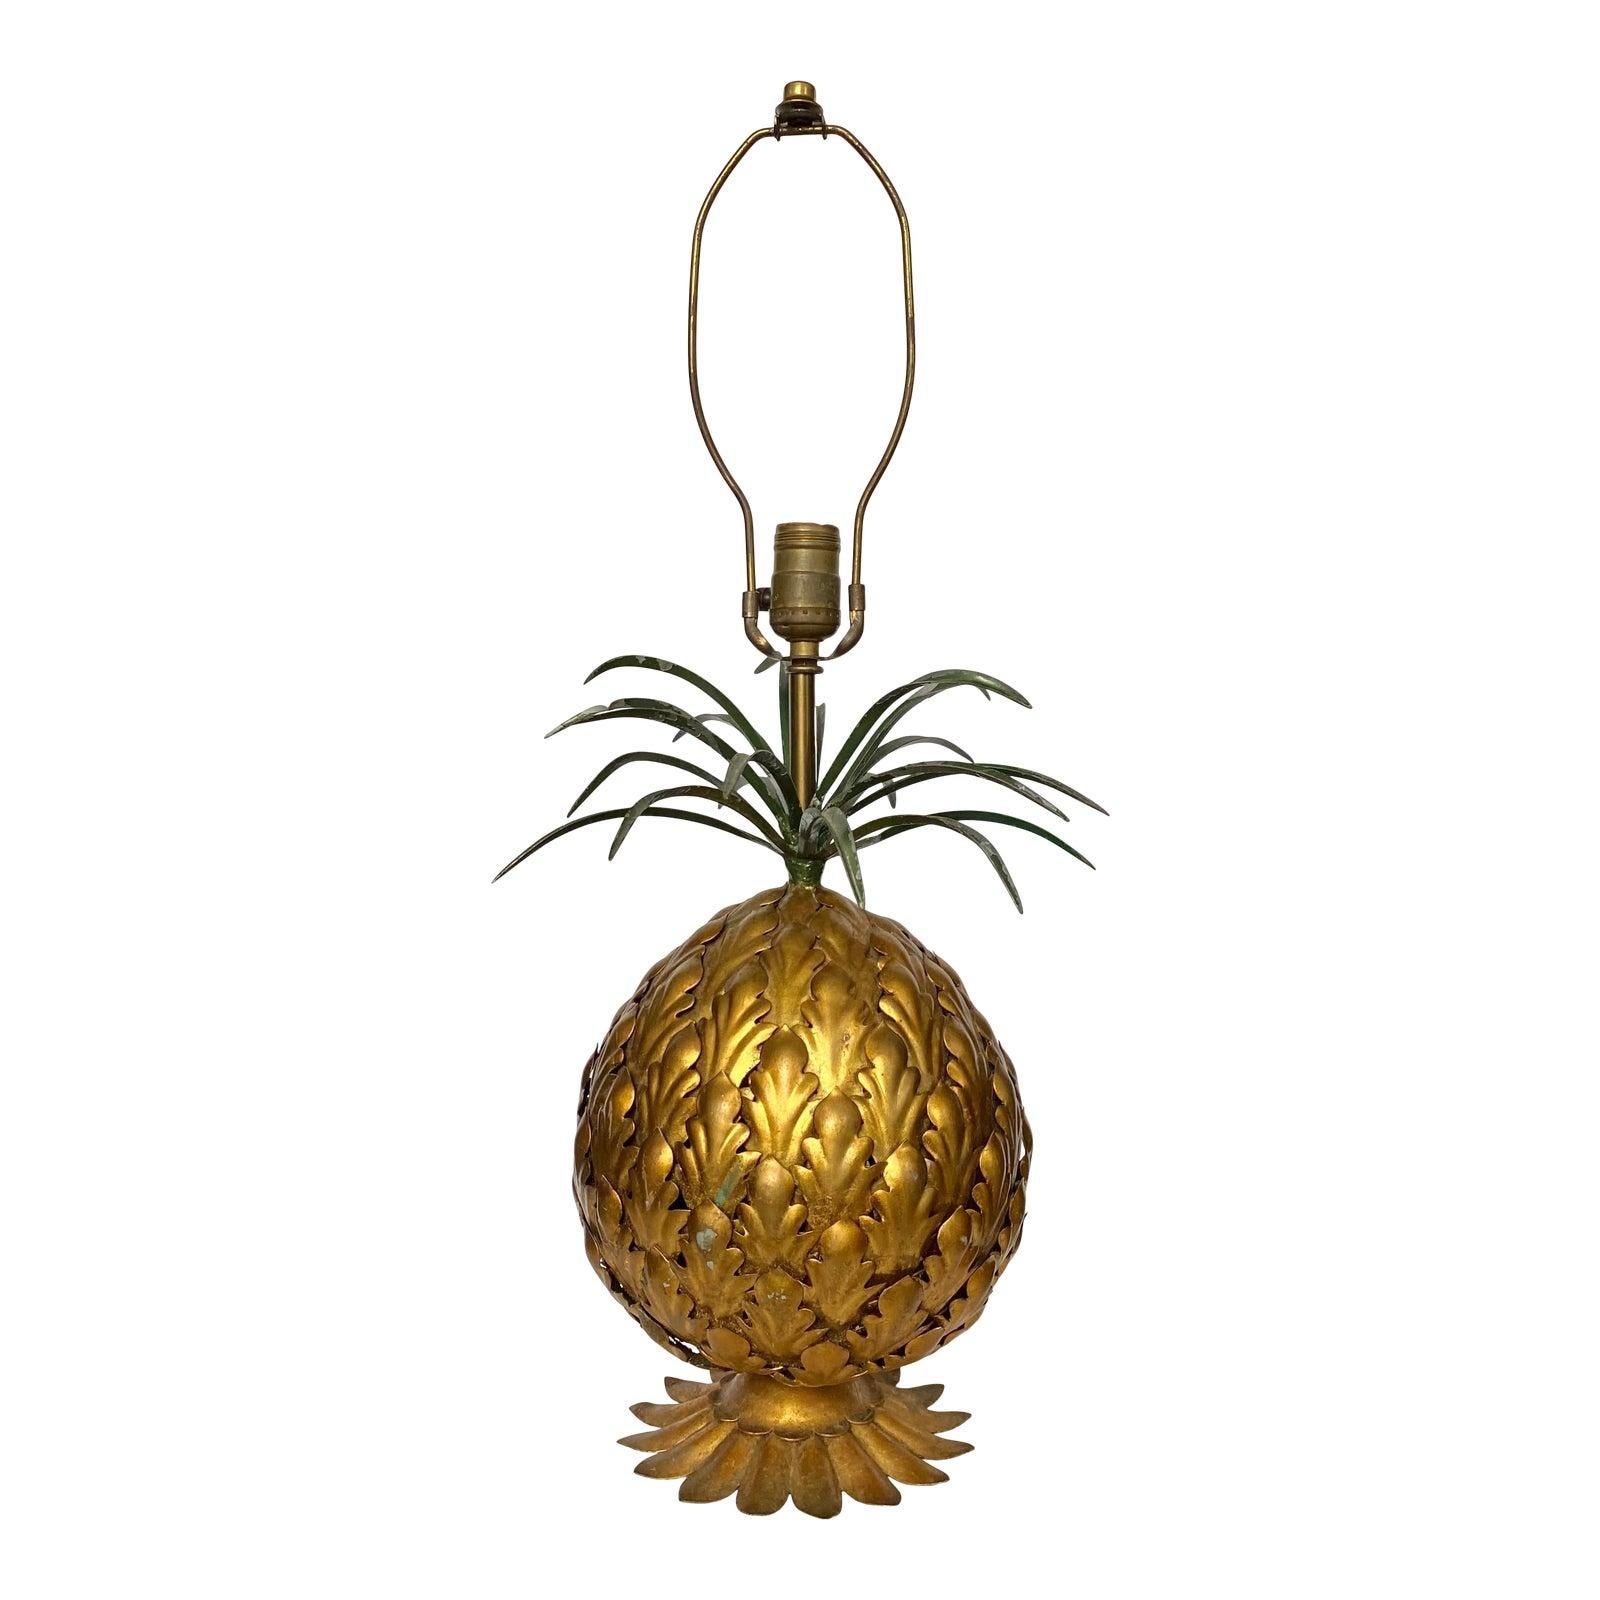 Gorgeous and unique sculptural Italian metal toleware pineapple table lamp. Body of lamp features welded metal fruit pieces in gold toned gilt finish. Metal slip leaves are nicely welded to the base of lamp. The top crown of the lamp features welded